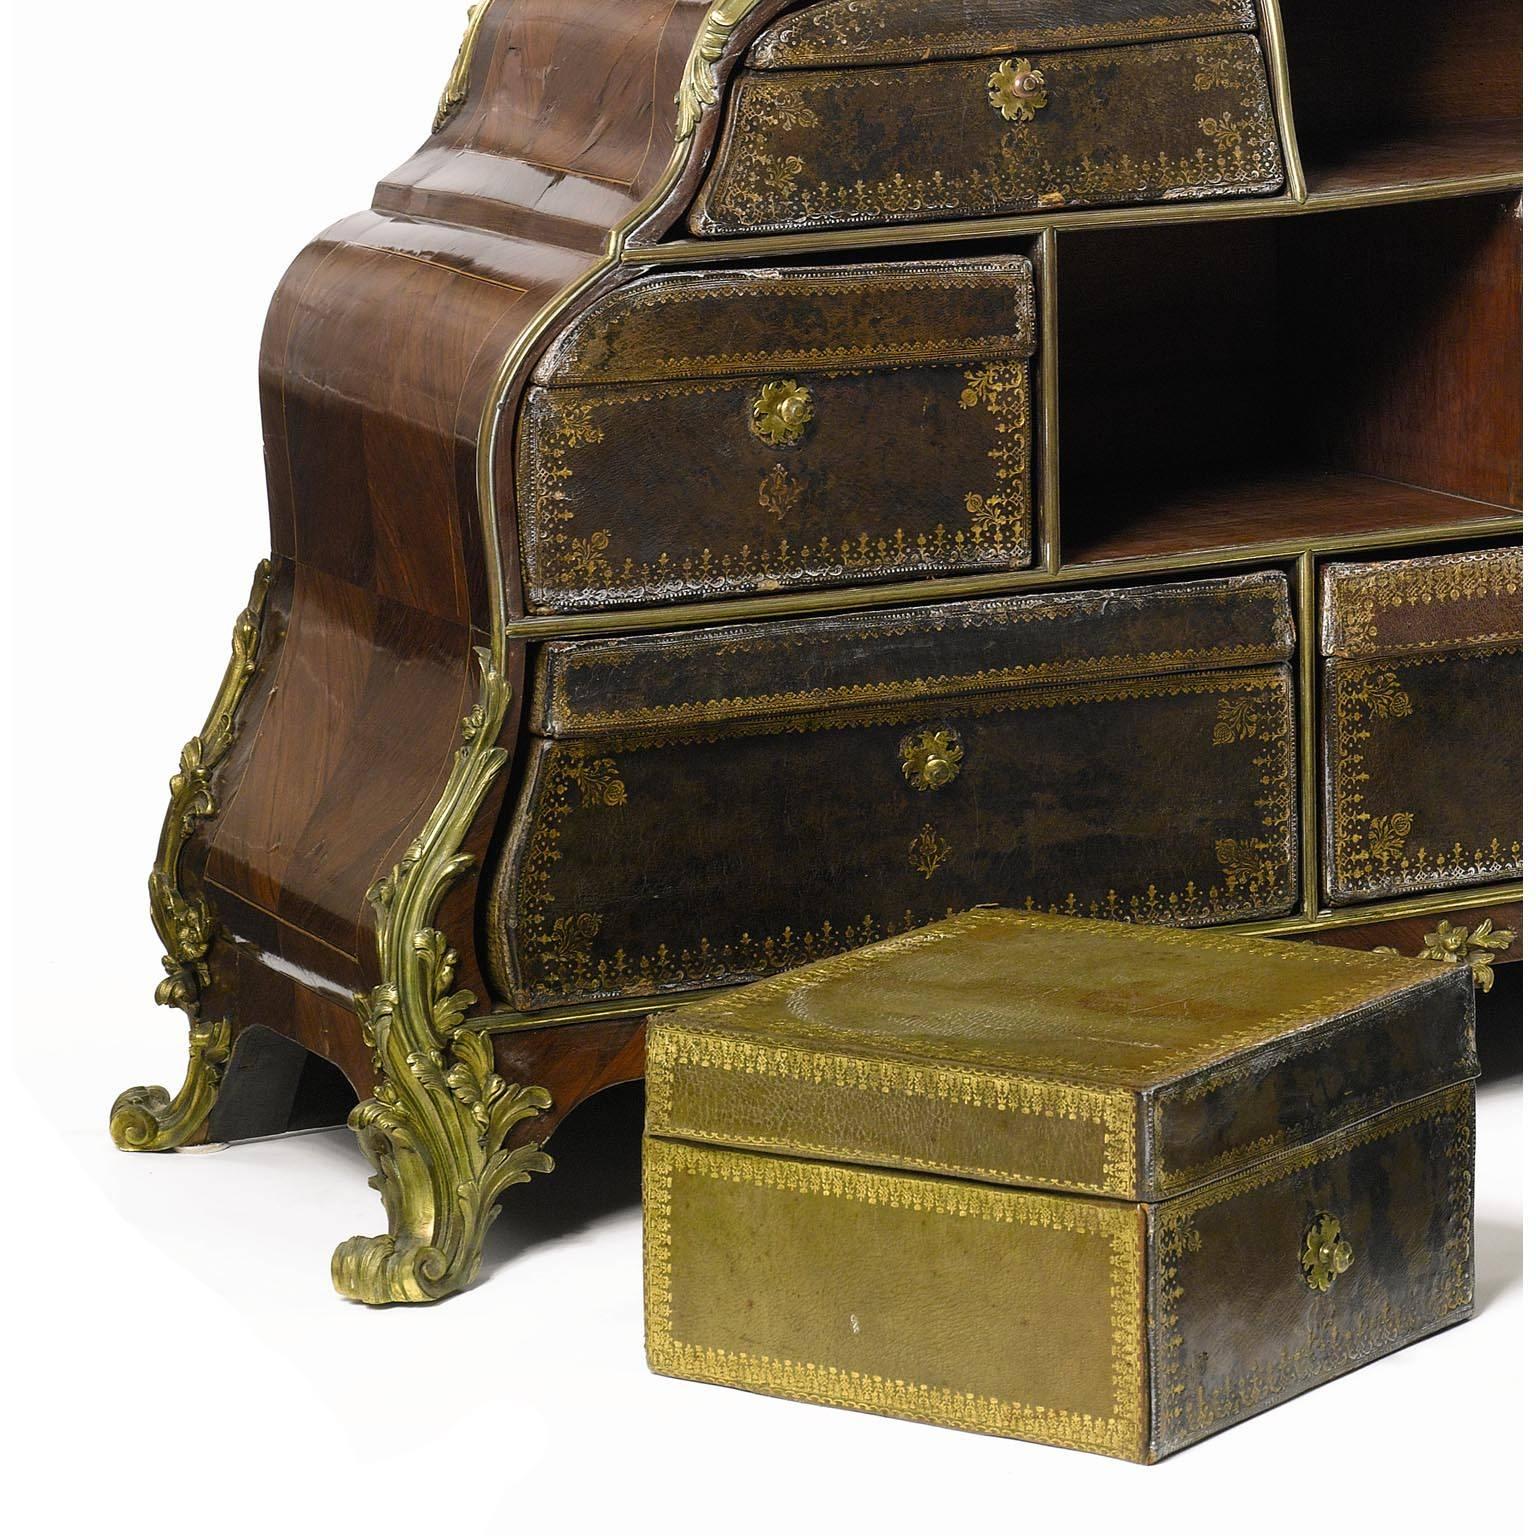 French 19th Century Louis XV Style Gilt-Bronze Mounted and Leather Cartonnier For Sale 1